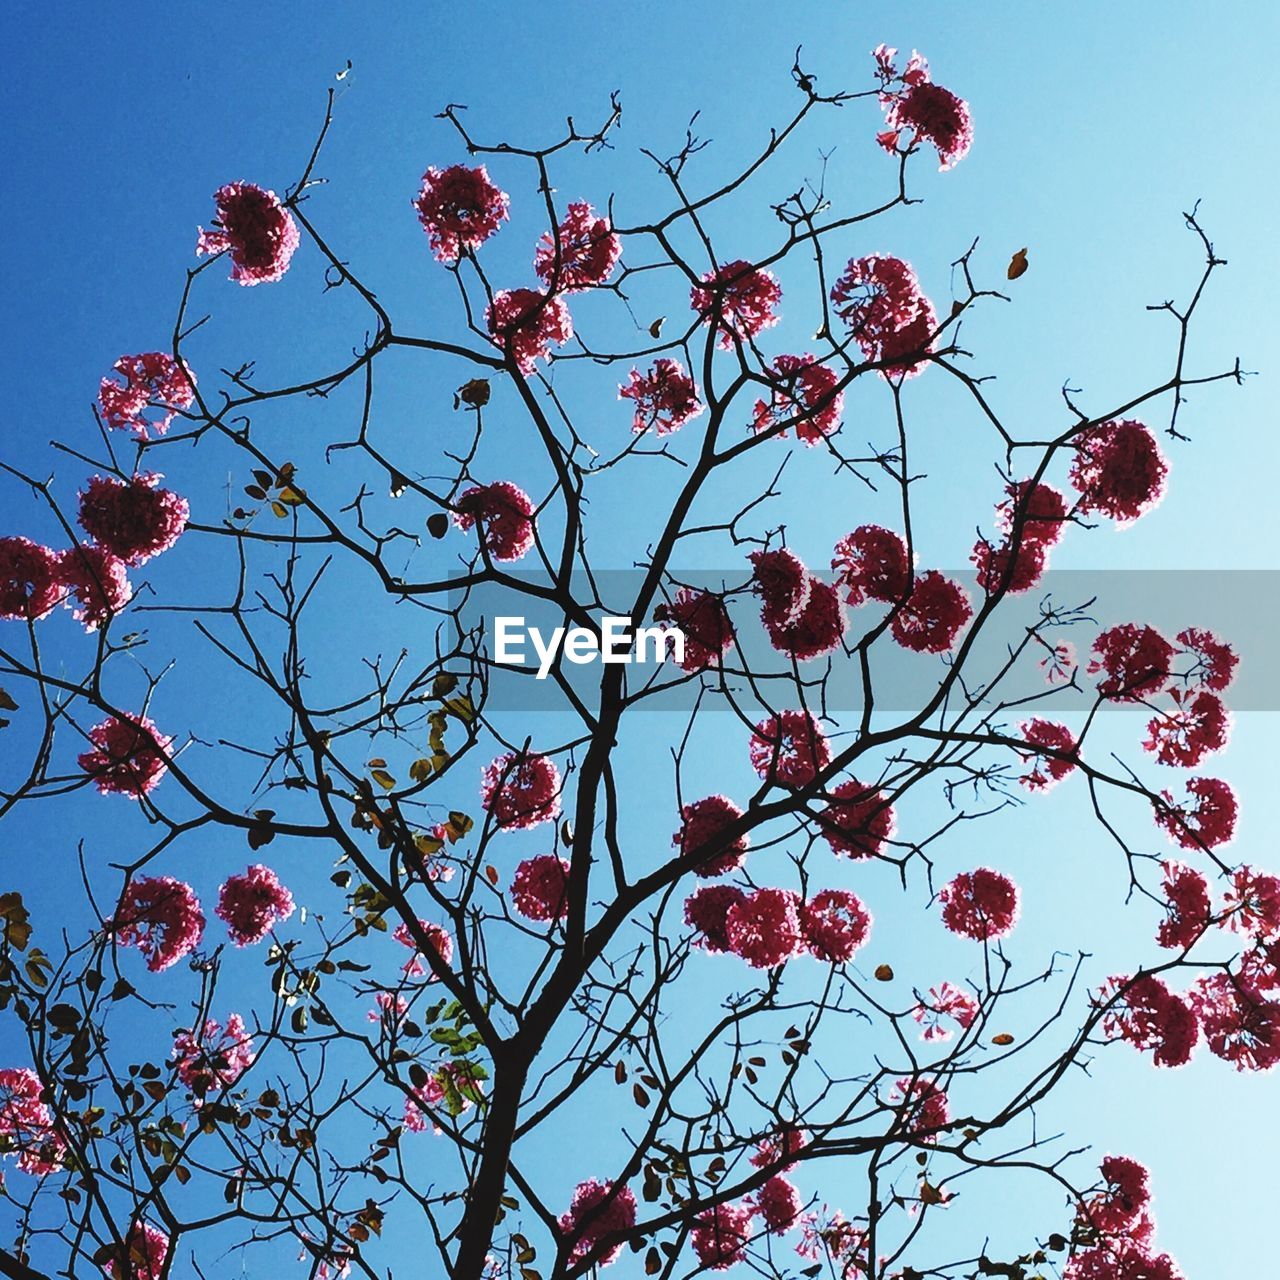 Low angle view of flowering tree against clear blue sky